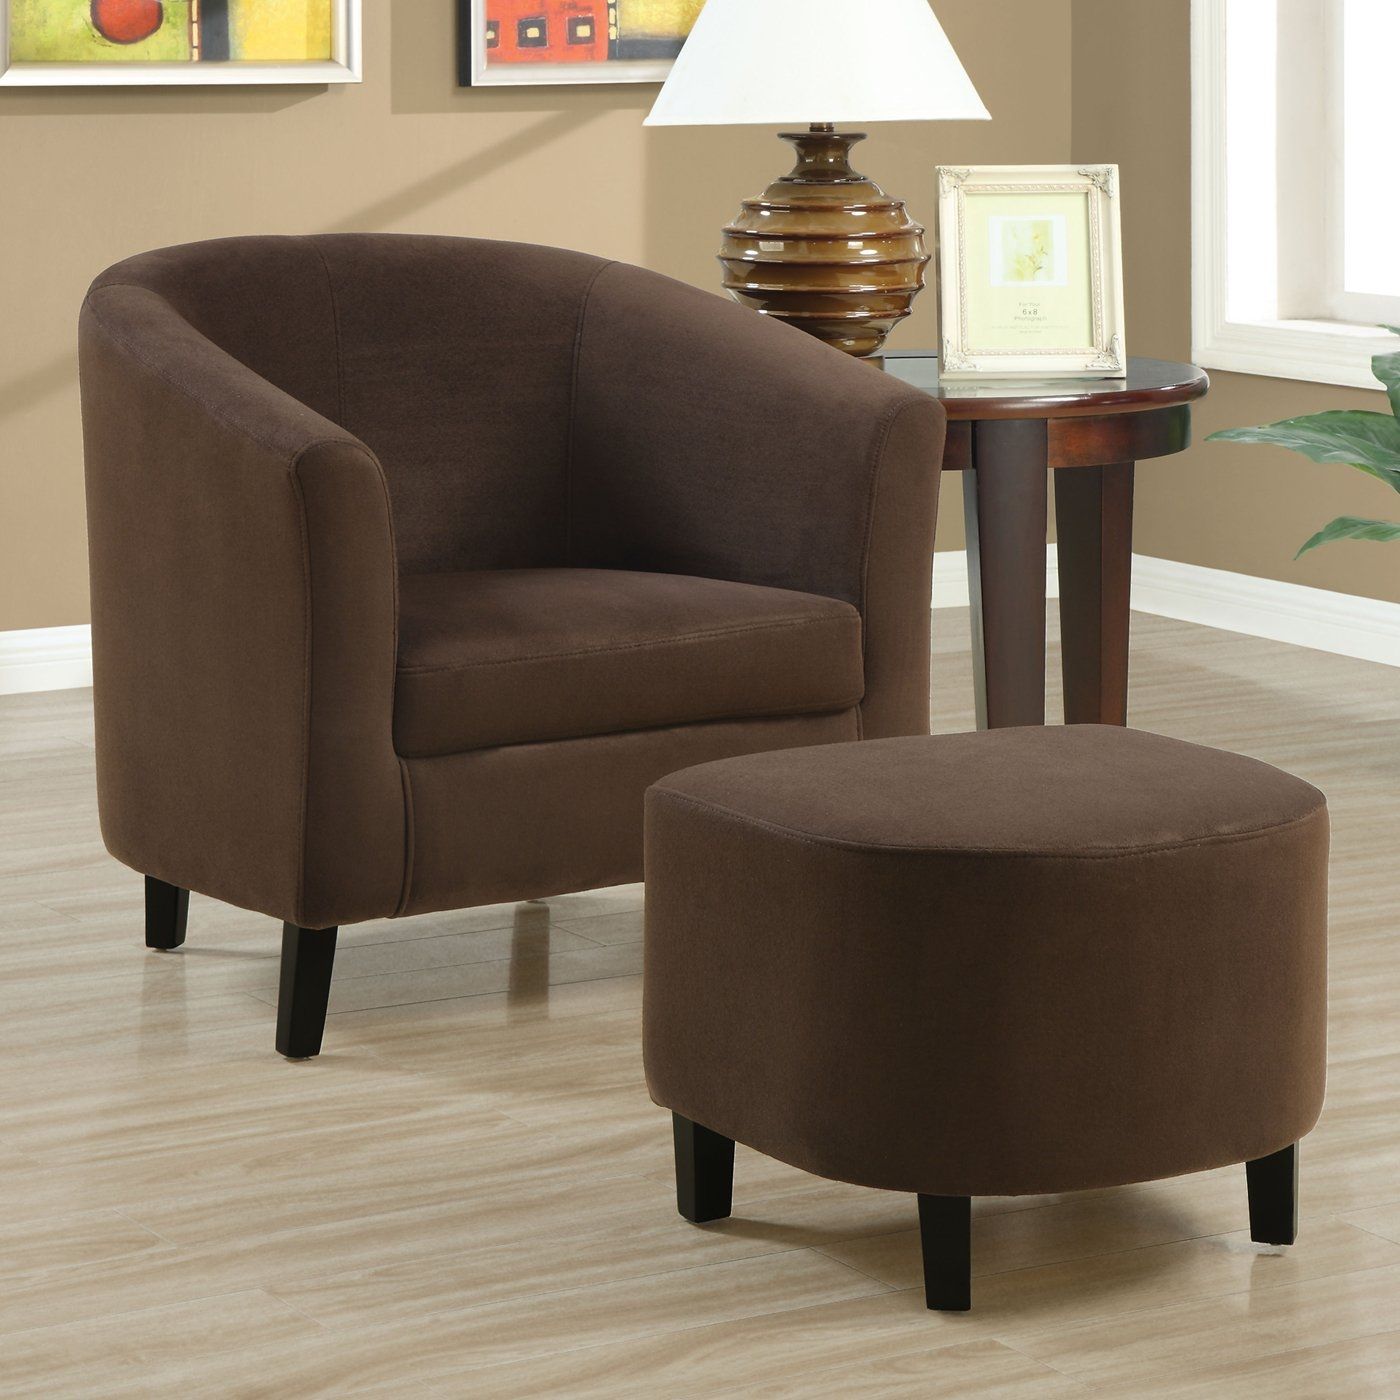 Round Chair And A Half With Ottoman Home Chair Designs In Sofa Chair With Ottoman (View 9 of 15)